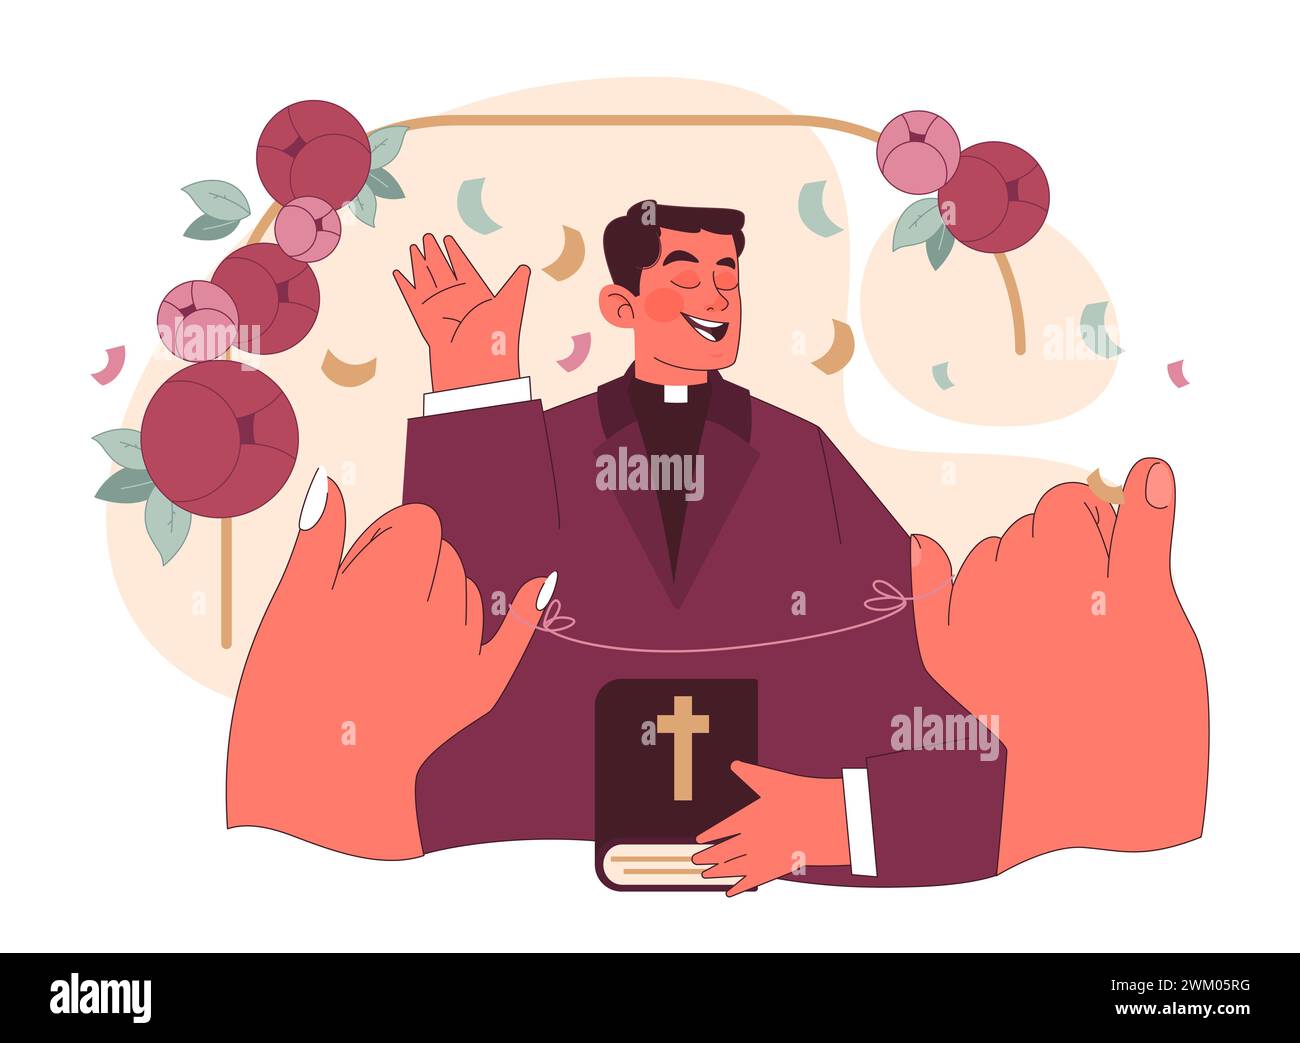 Vows concept. A priest joyfully recites wedding vows, holding a holy book, as hands reach out in celebration amidst floral decor. Moments of unity. Flat vector illustration. Stock Vector